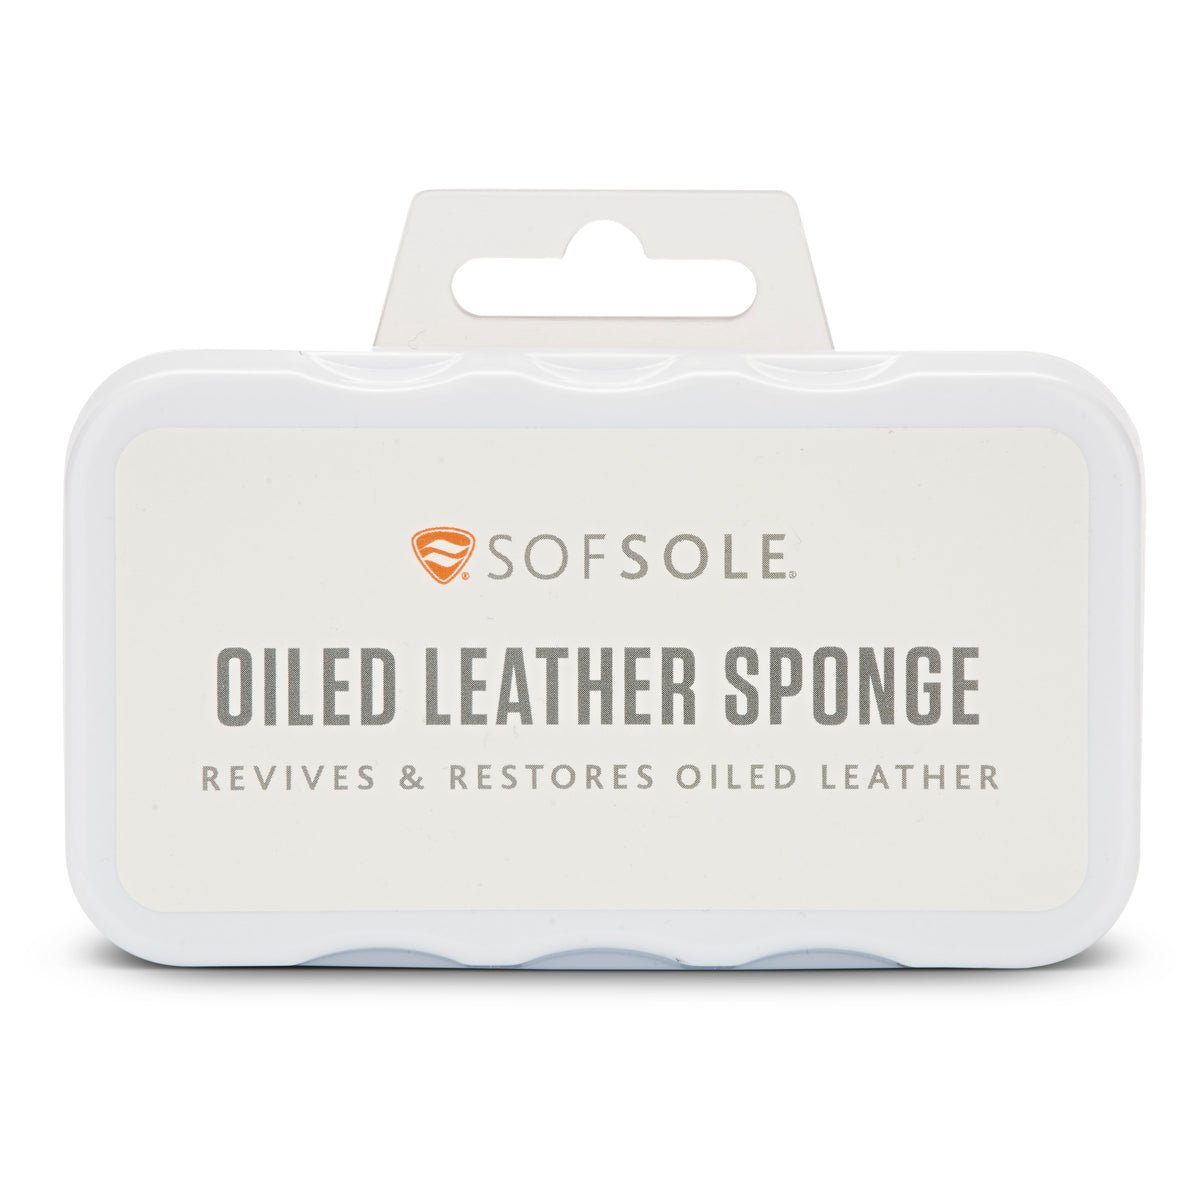 SOFSOLE OILED LEATHER SPONGE